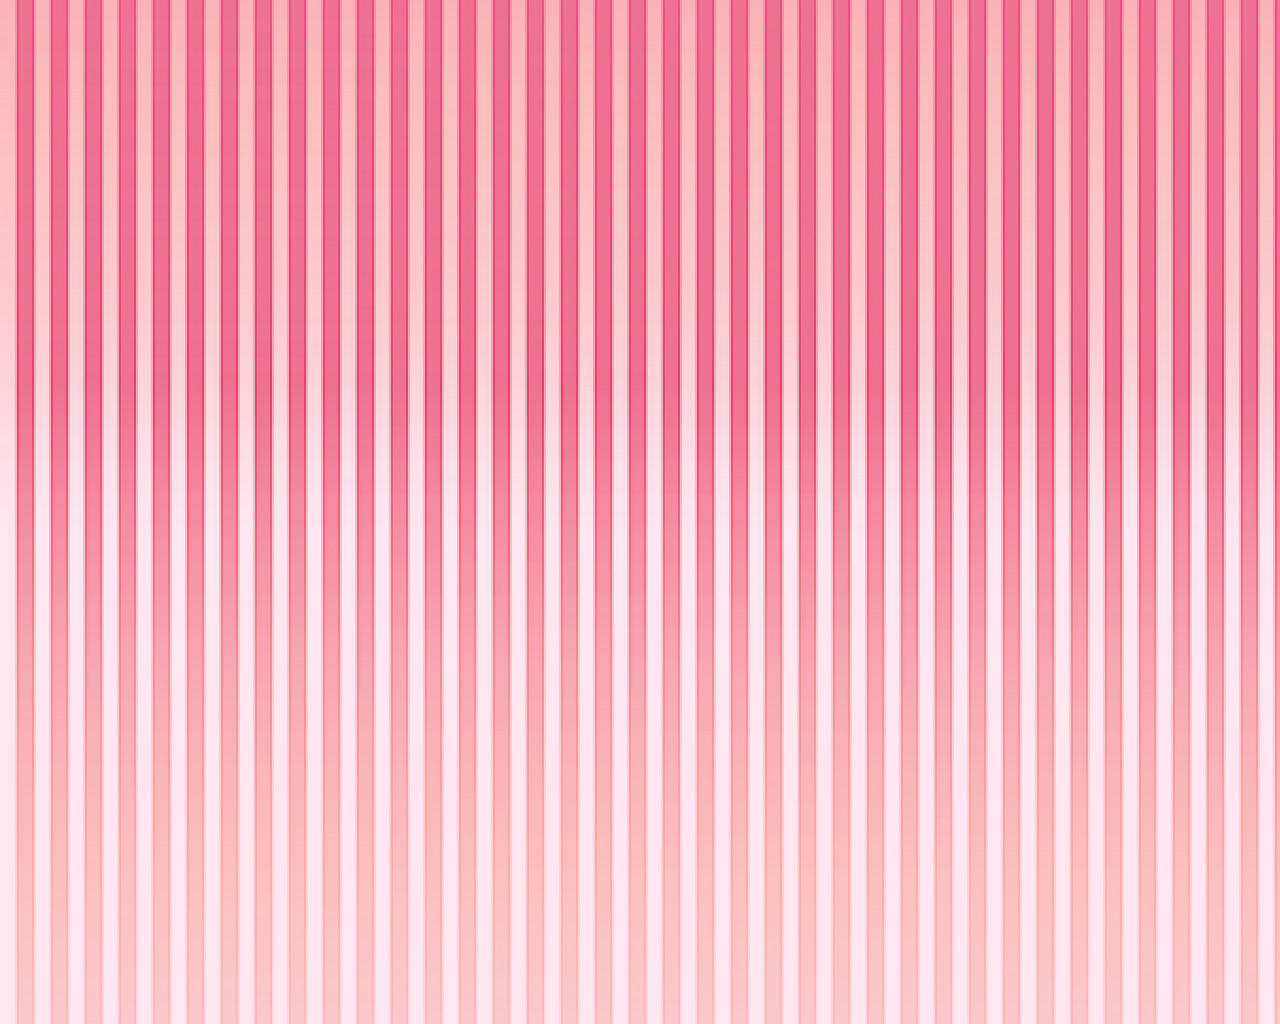 Amazoncom Peel and Stick Vinyl Pink and White Striped Wallpaper Contact  Paper Wallpaper Self Adhesive Stripe Shelf Liner Dresser Drawer Cabinets  Liner Furniture Wall Paper Sticker Removable 177x117 Inches  Everything  Else